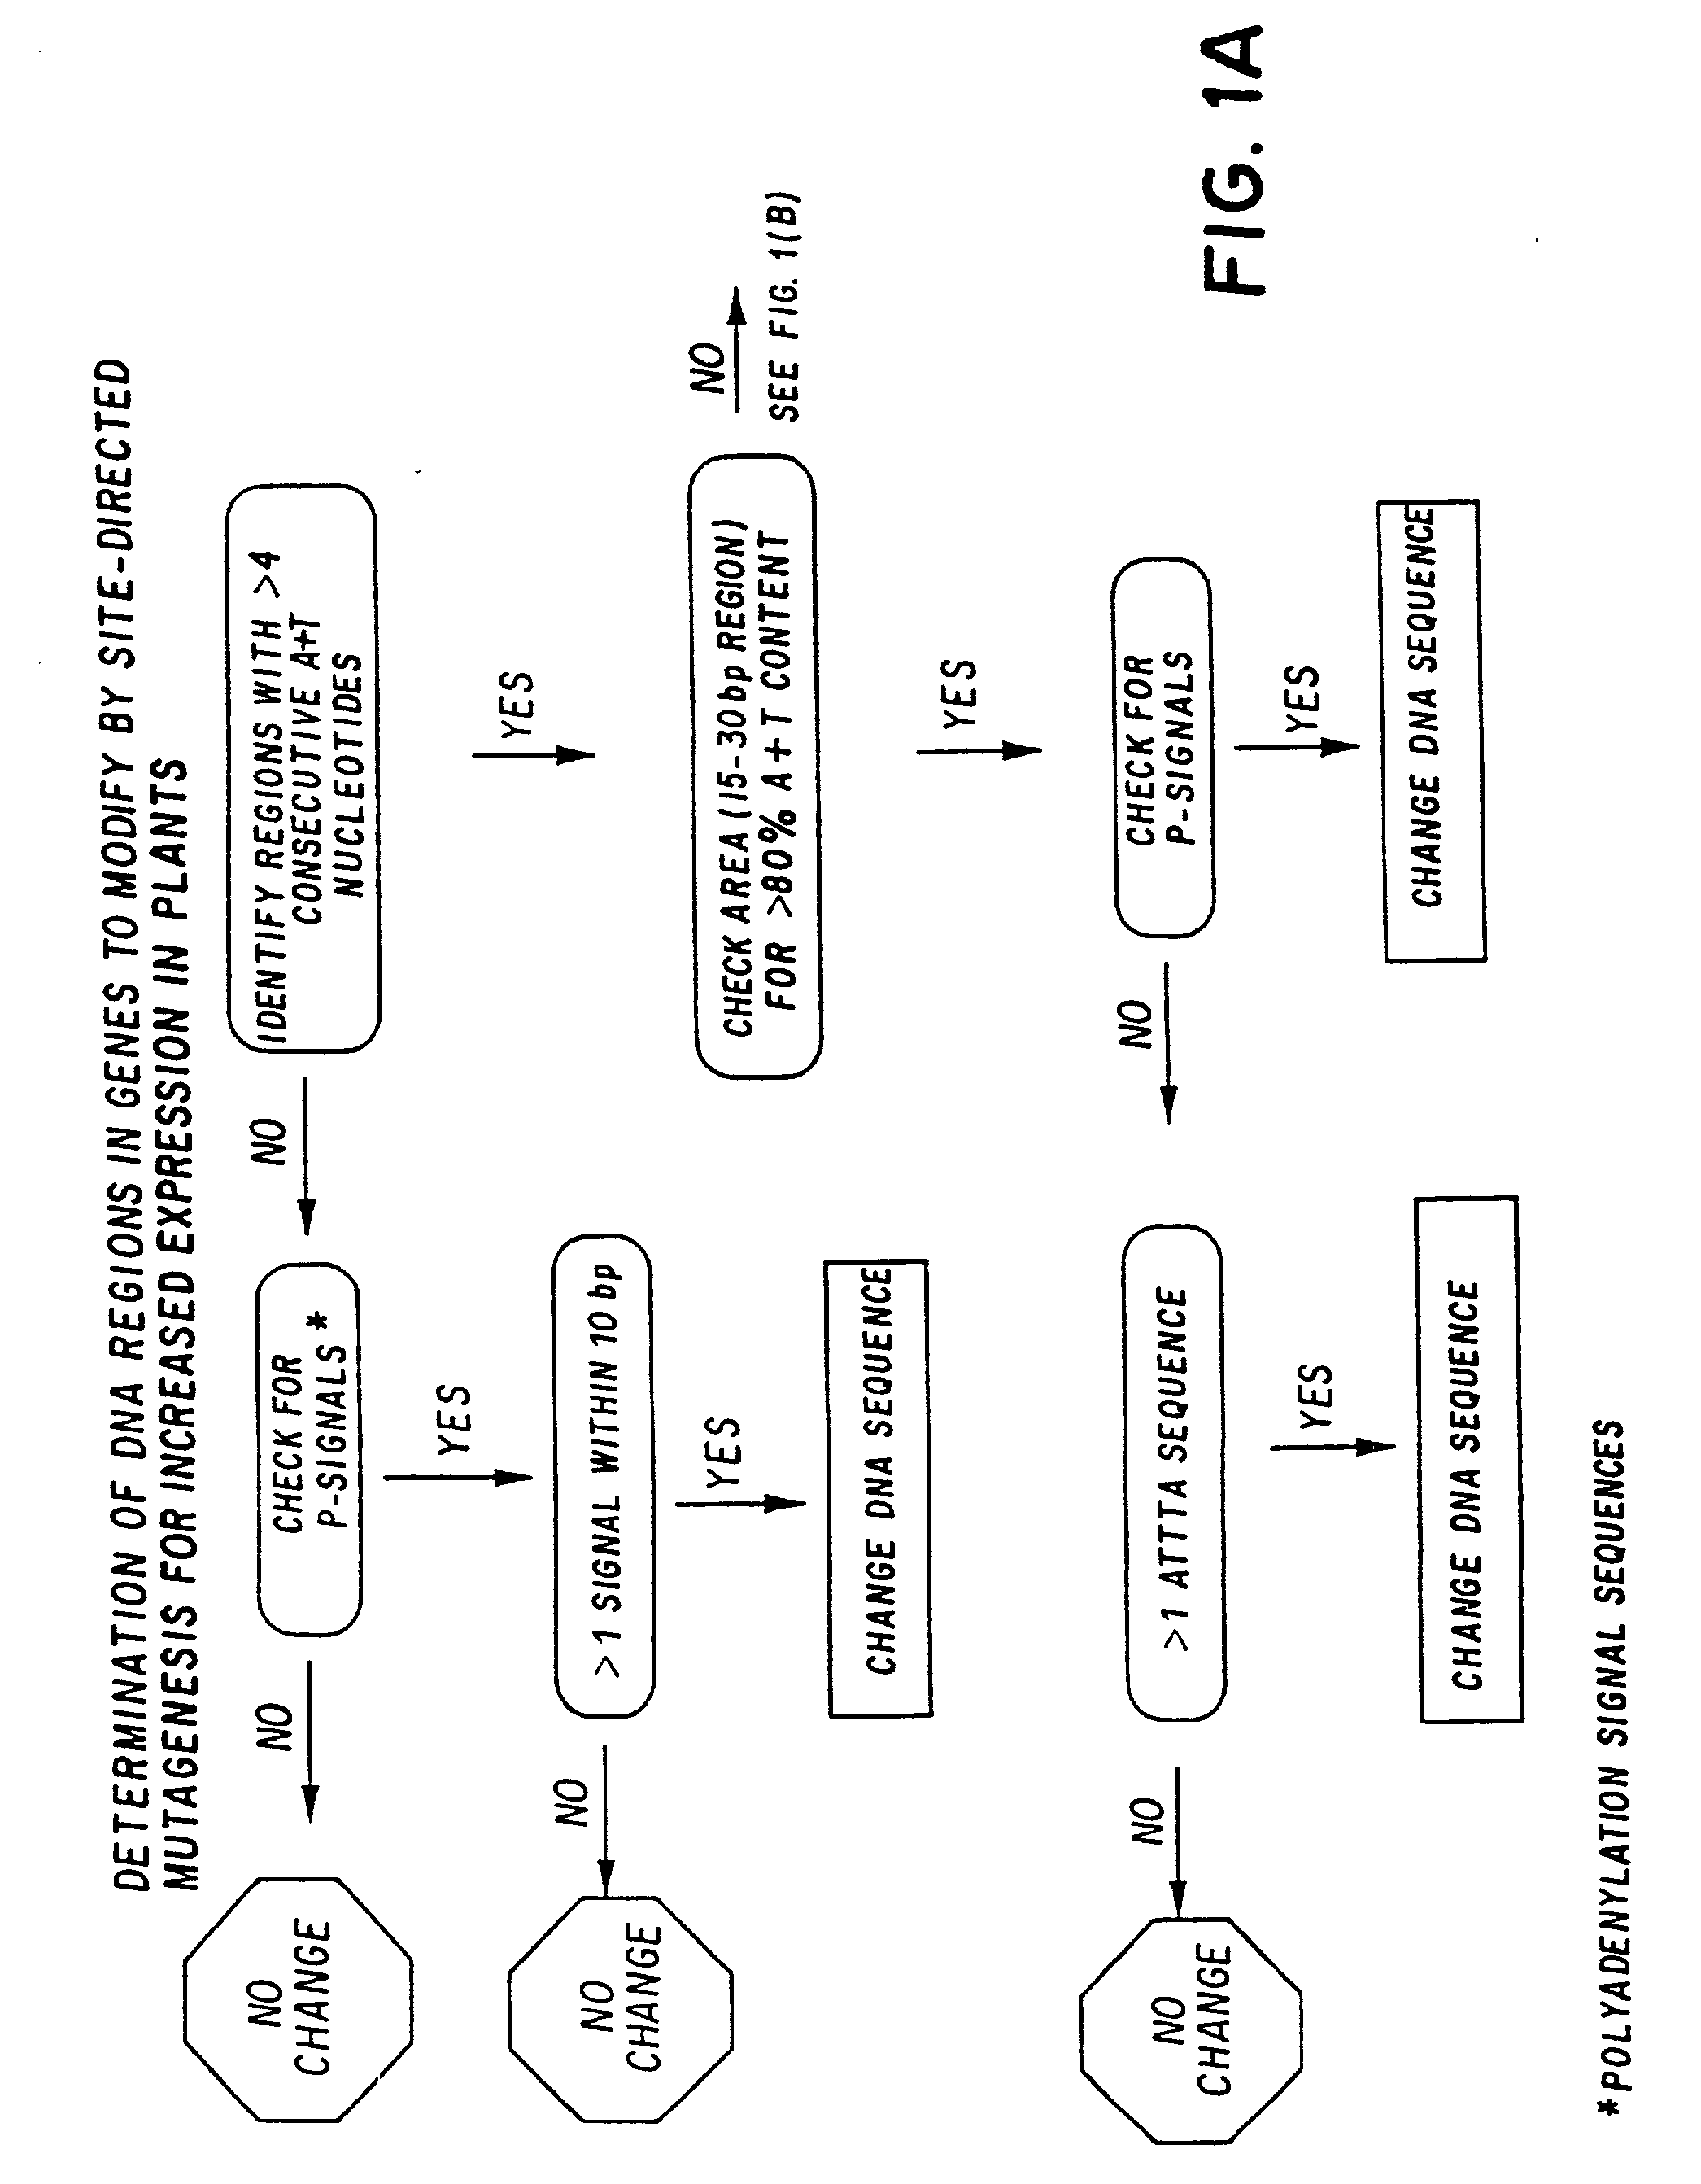 Synthetic plant genes and method for preparation